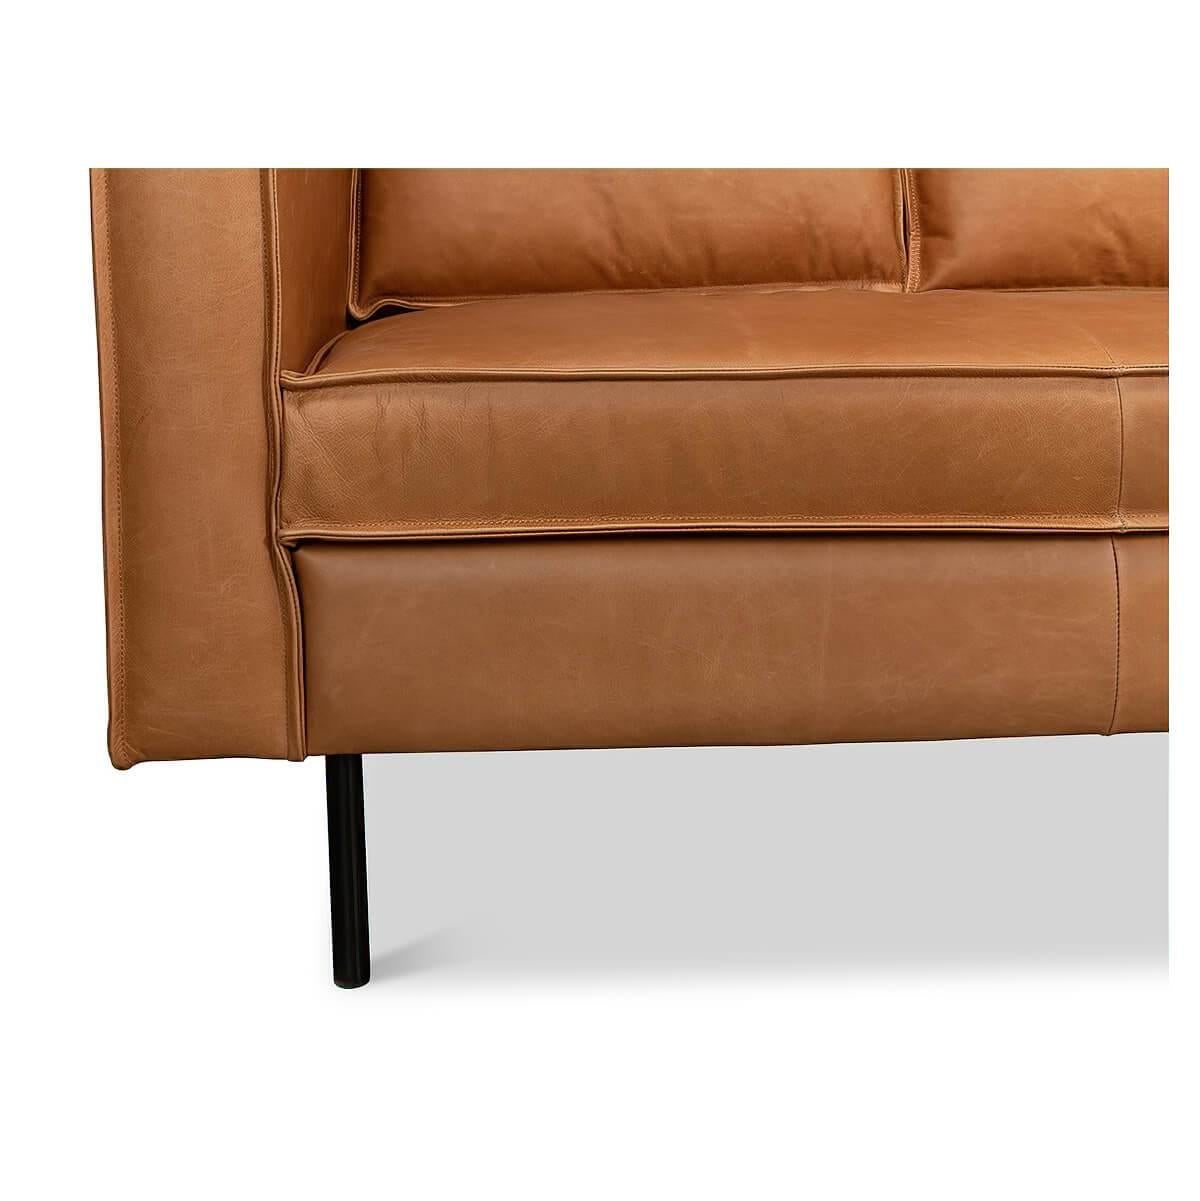 Contemporary Modern Leather Sofa For Sale